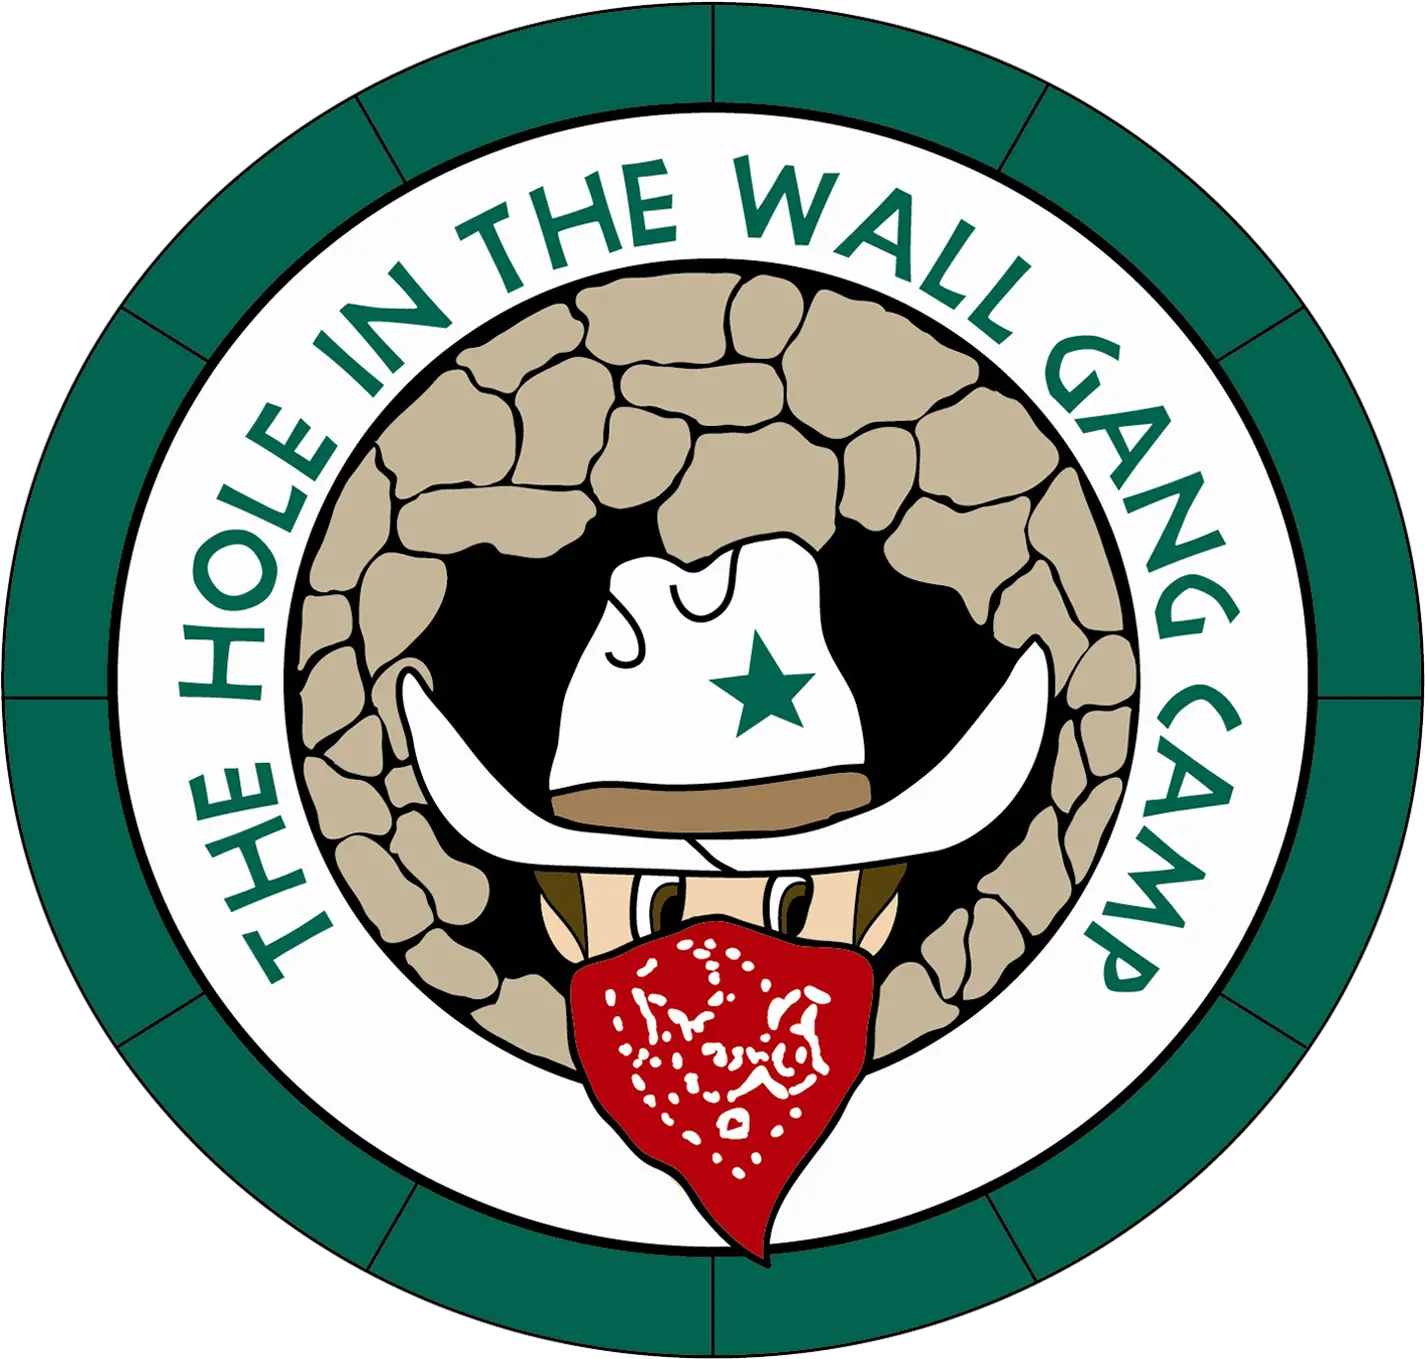 Hole In The Wall Gang Camp Logo Clipart Hole In The Wall Gang Camp Logo Png Hole In Wall Png